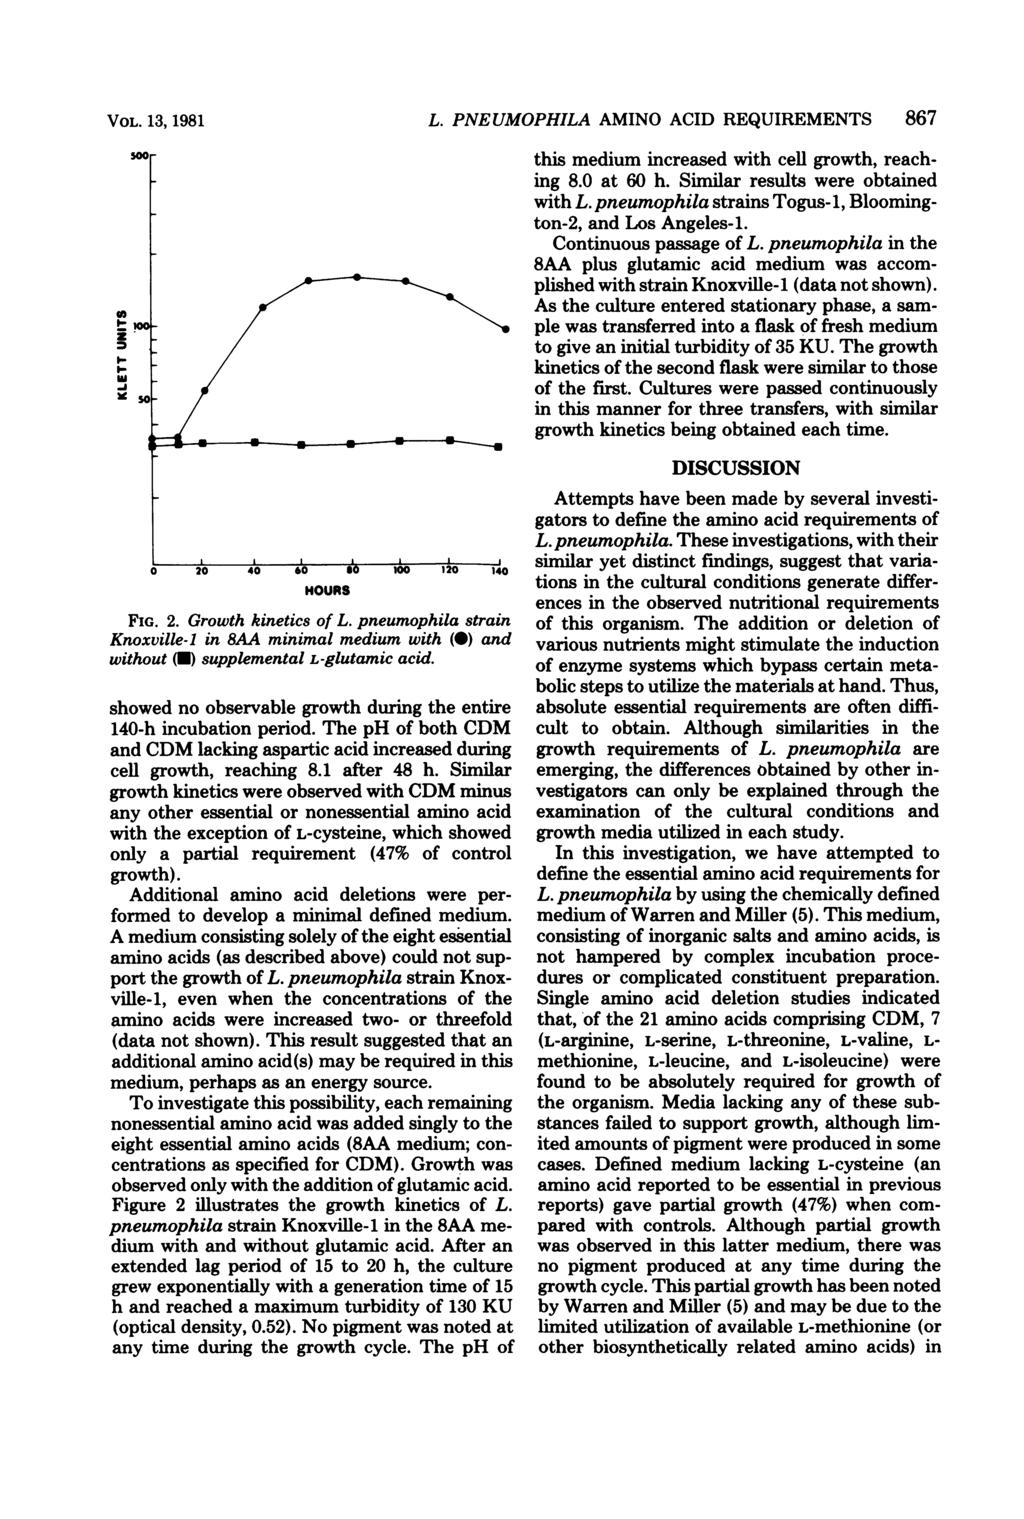 VOL. 13, 1981 1-1 1 20 40 60 si 100 120 140 HOURS FIG. 2. Growth kinetics of L. pneumophila strain Knoxville-1 in 8AA minimal medium with (O) and without (M) supplemental L-glutamic acid.